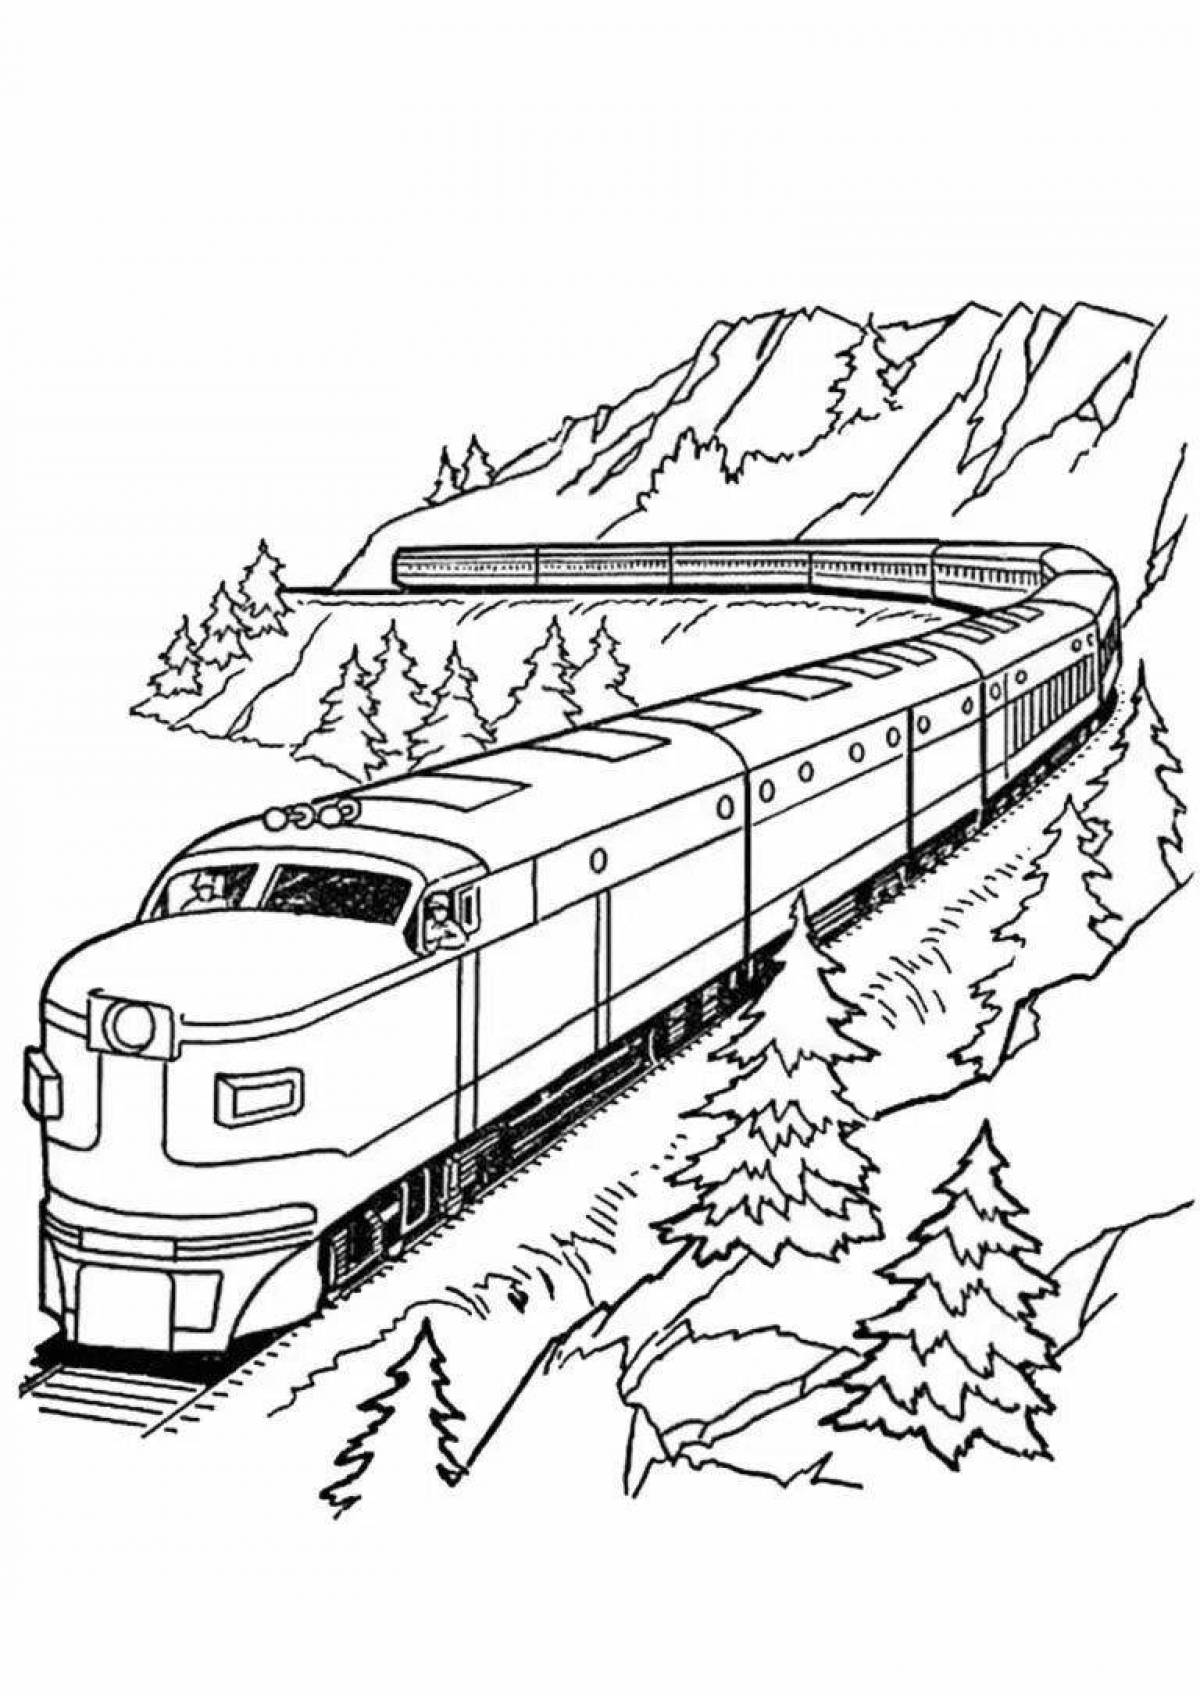 Colorful Russian trains coloring book